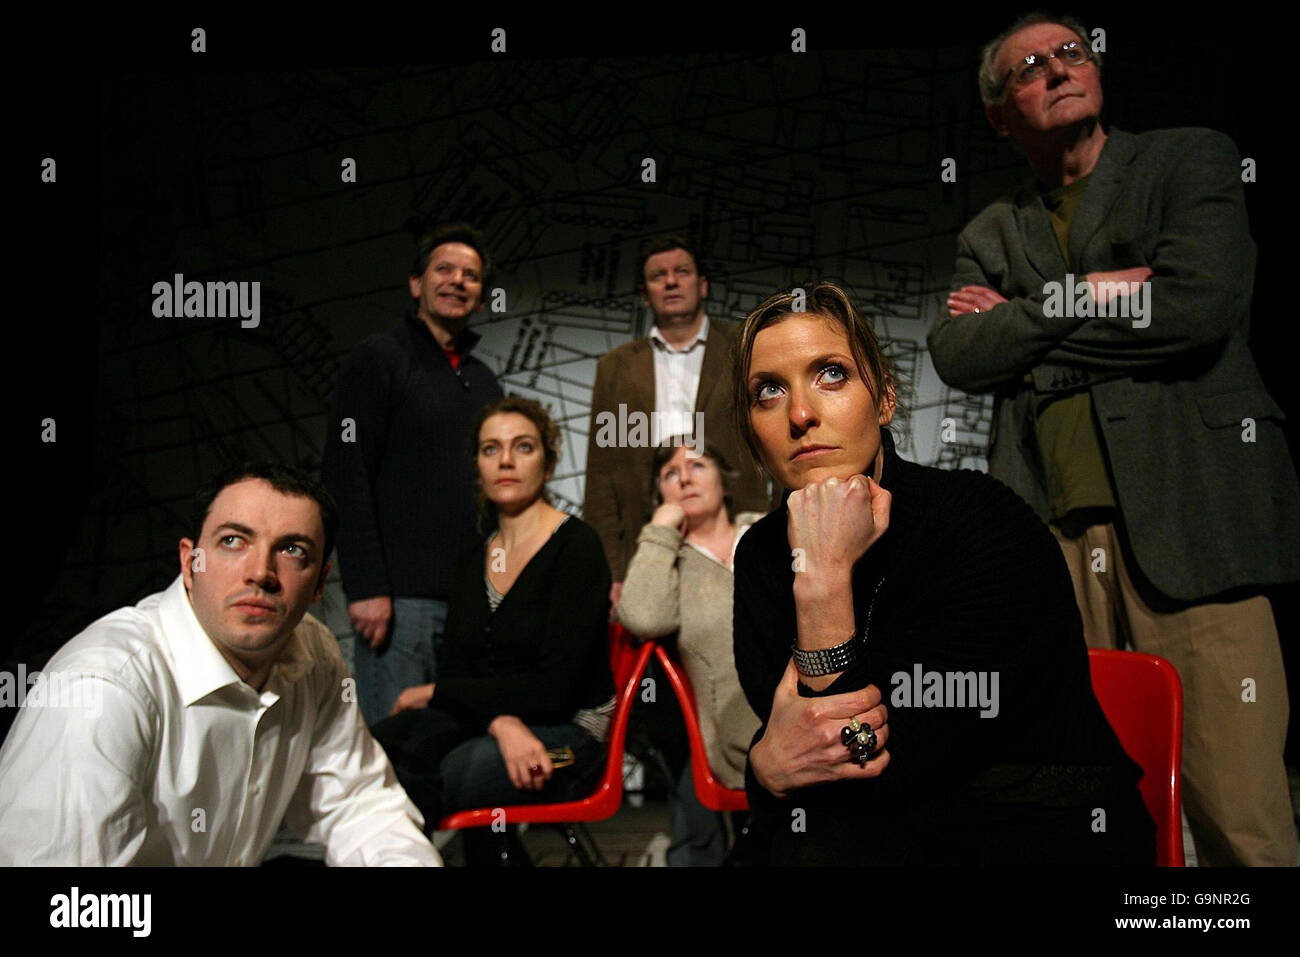 The cast of the Dublin Premiere of 'Heroes with their hands in the Air' a play by Fintan Brady, edited and introduced by Eamon McCann. Based on the book 'The Bloody Sunday Inquiry - the families speak out'. Pictured from left to right, Paul Kennedy, Seamus Heeney, Maggie Hayes, Gerry Doherty, Carmel McCafferty, Claire Connor and Kevin McCallion. Stock Photo